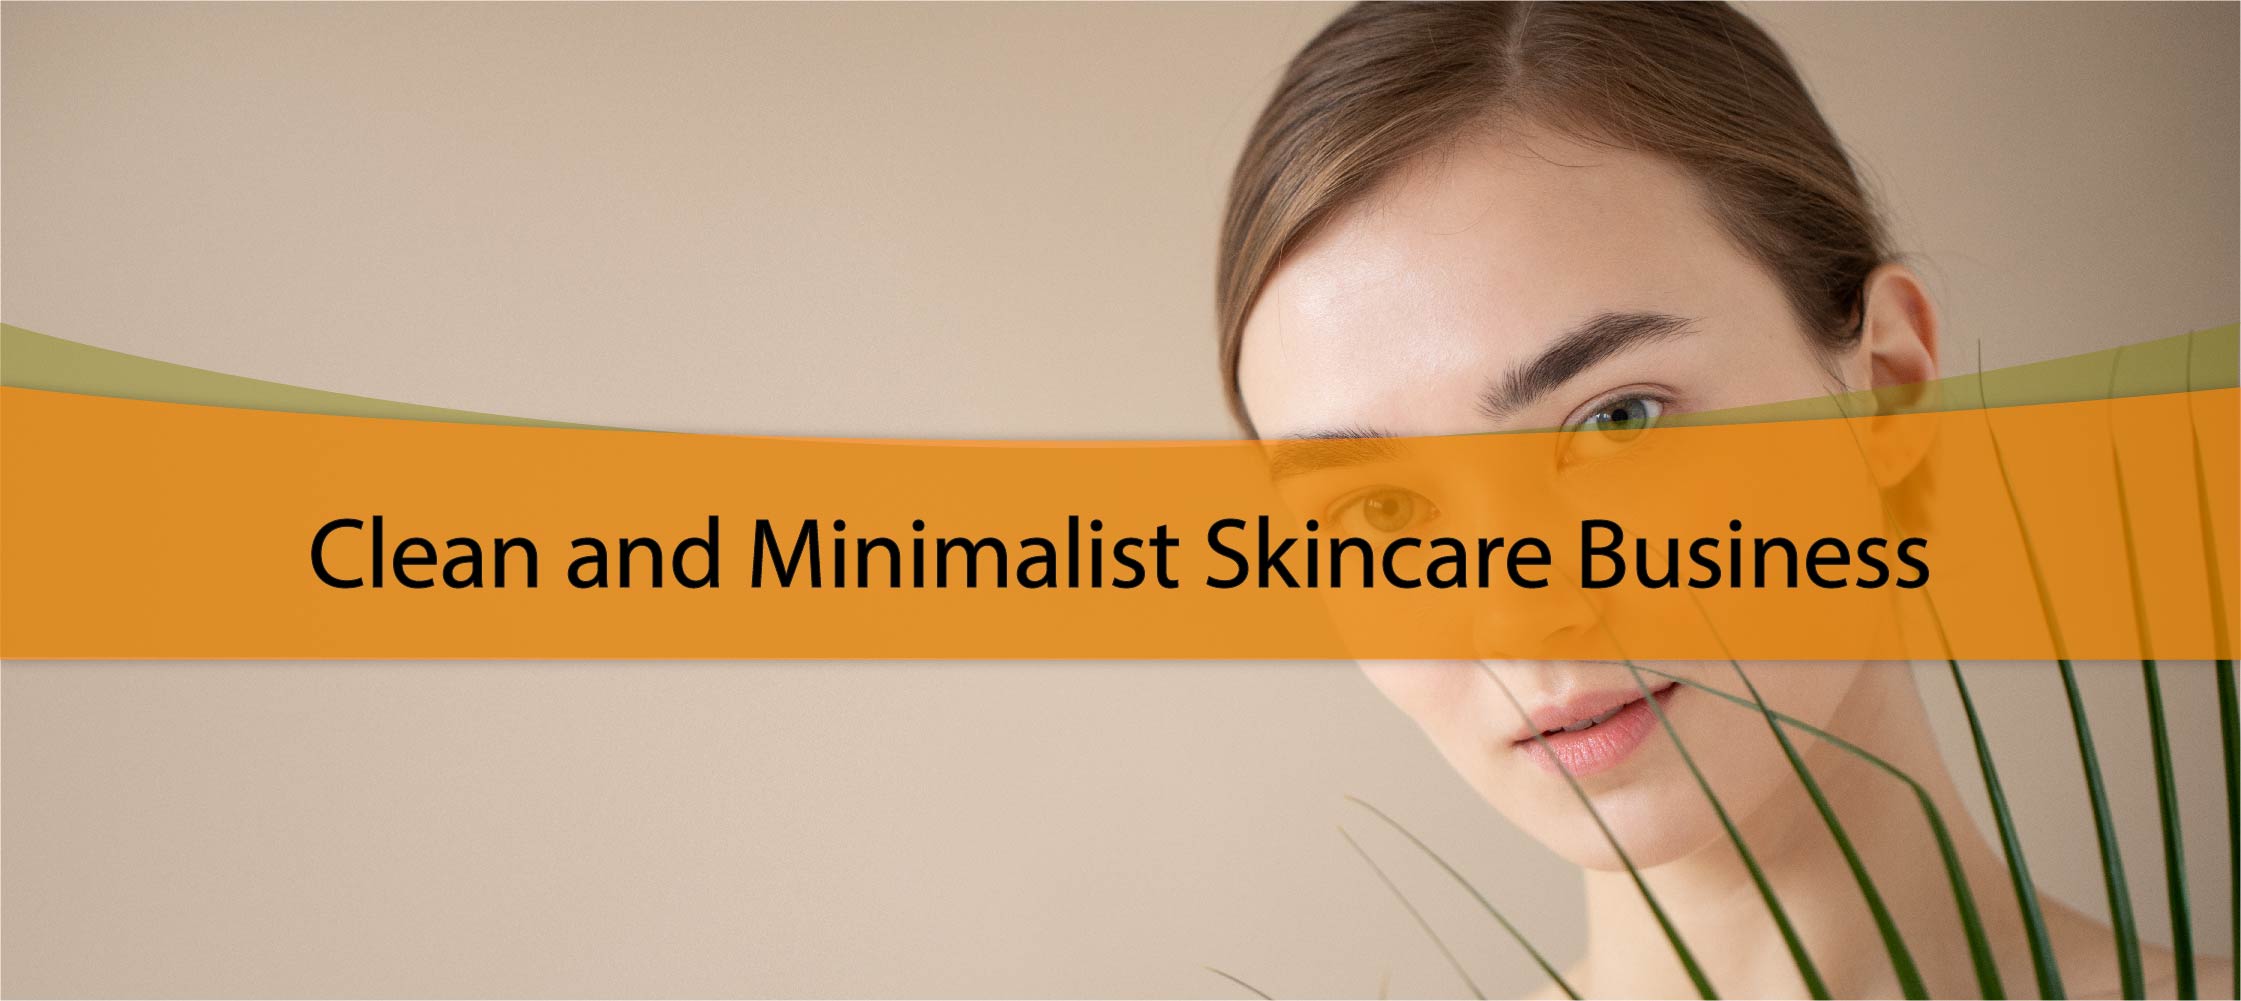 Clean and Minimalist Skincare Business